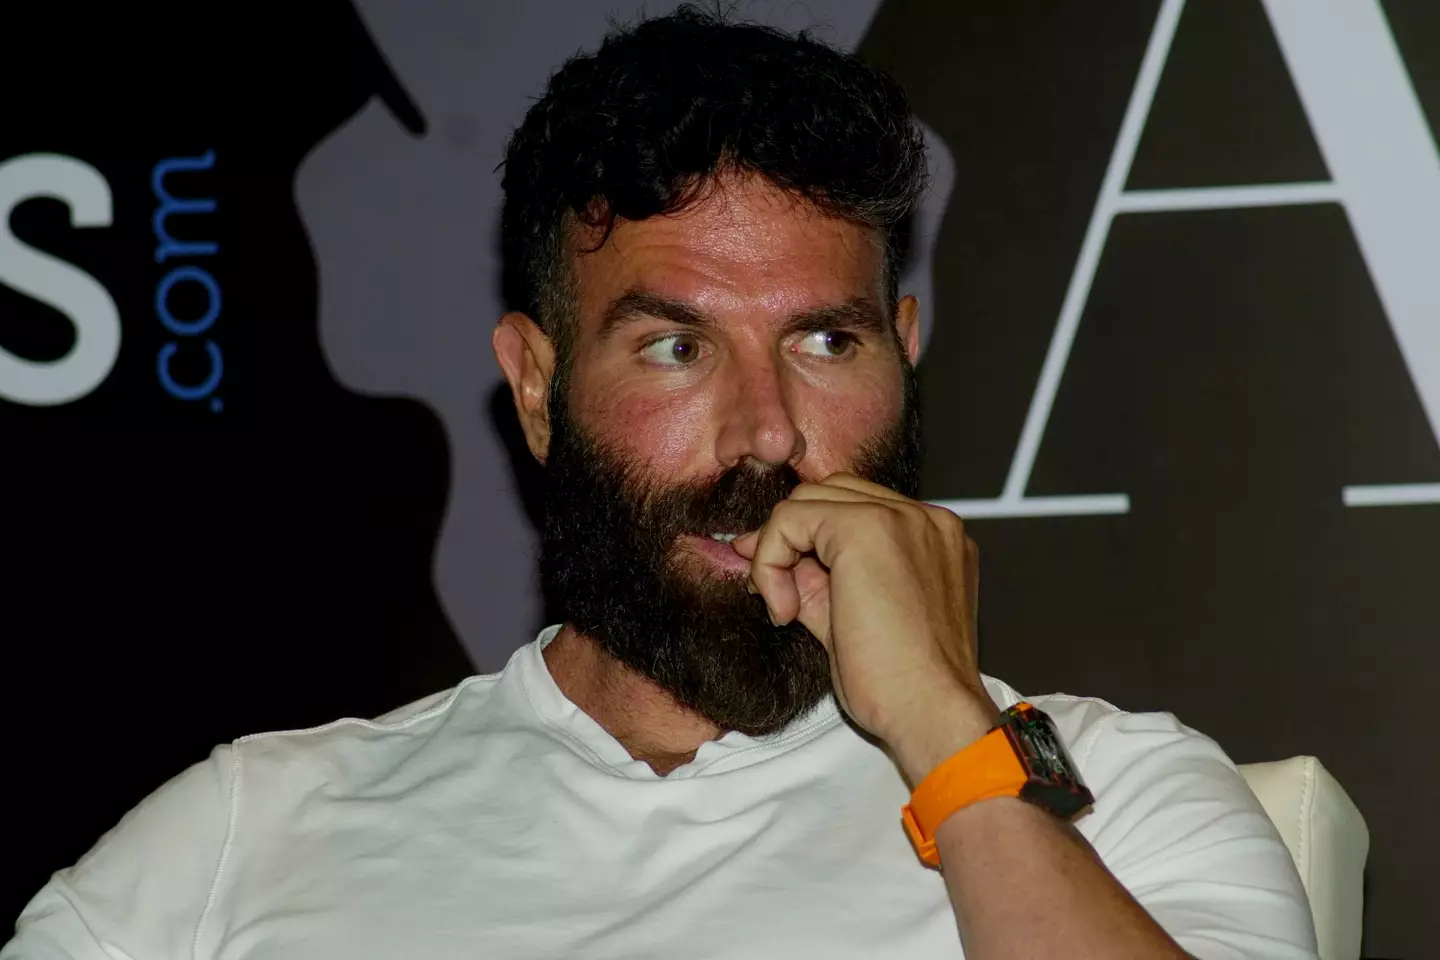 Dan Bilzerian has opened up about the four days of partying before his two heart attacks.